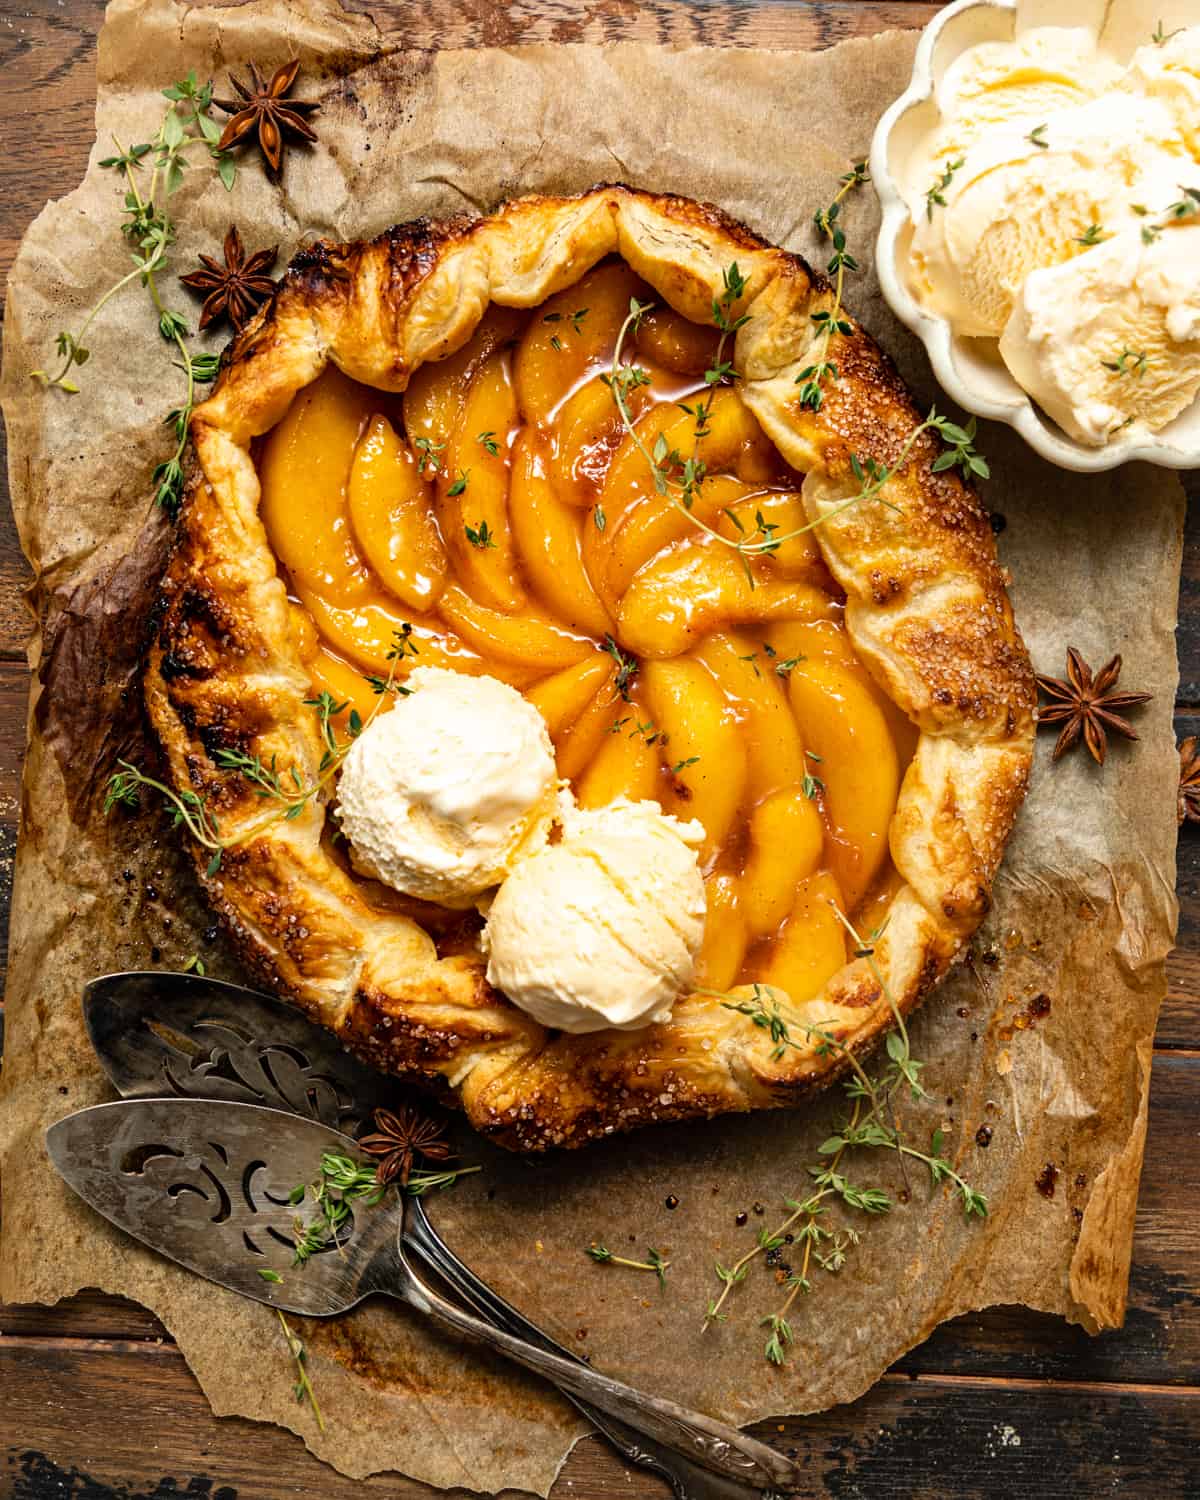 Rustic peach galette with two scoops of vanilla ice cream on top.